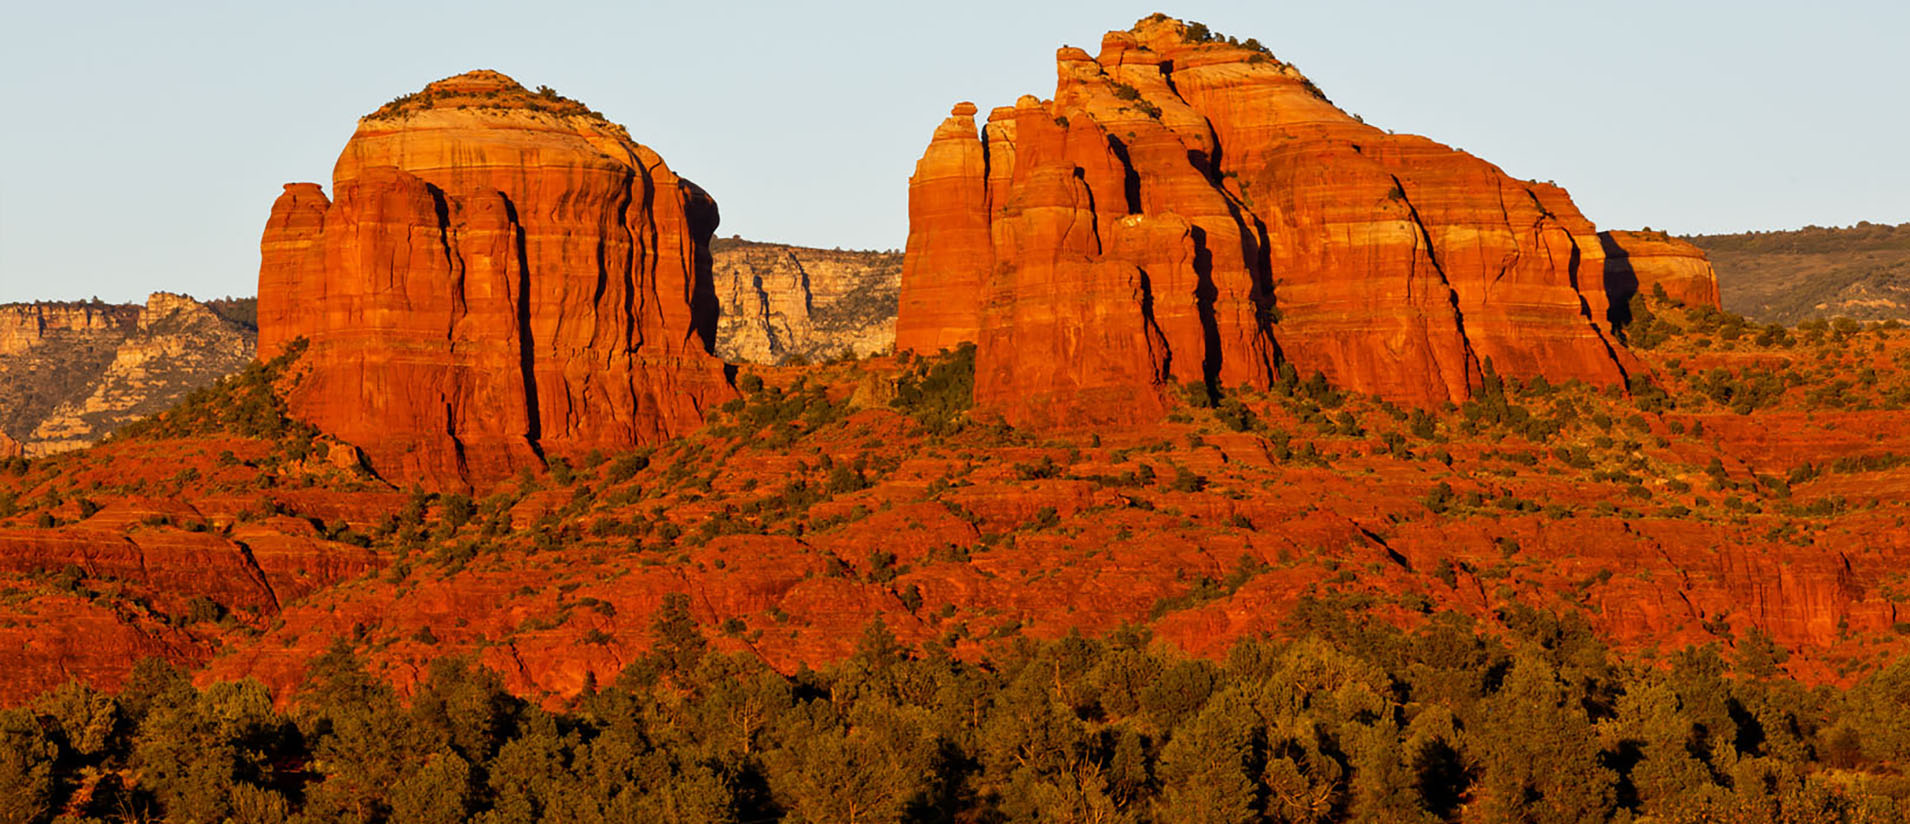 Red Rock formations visible from the park